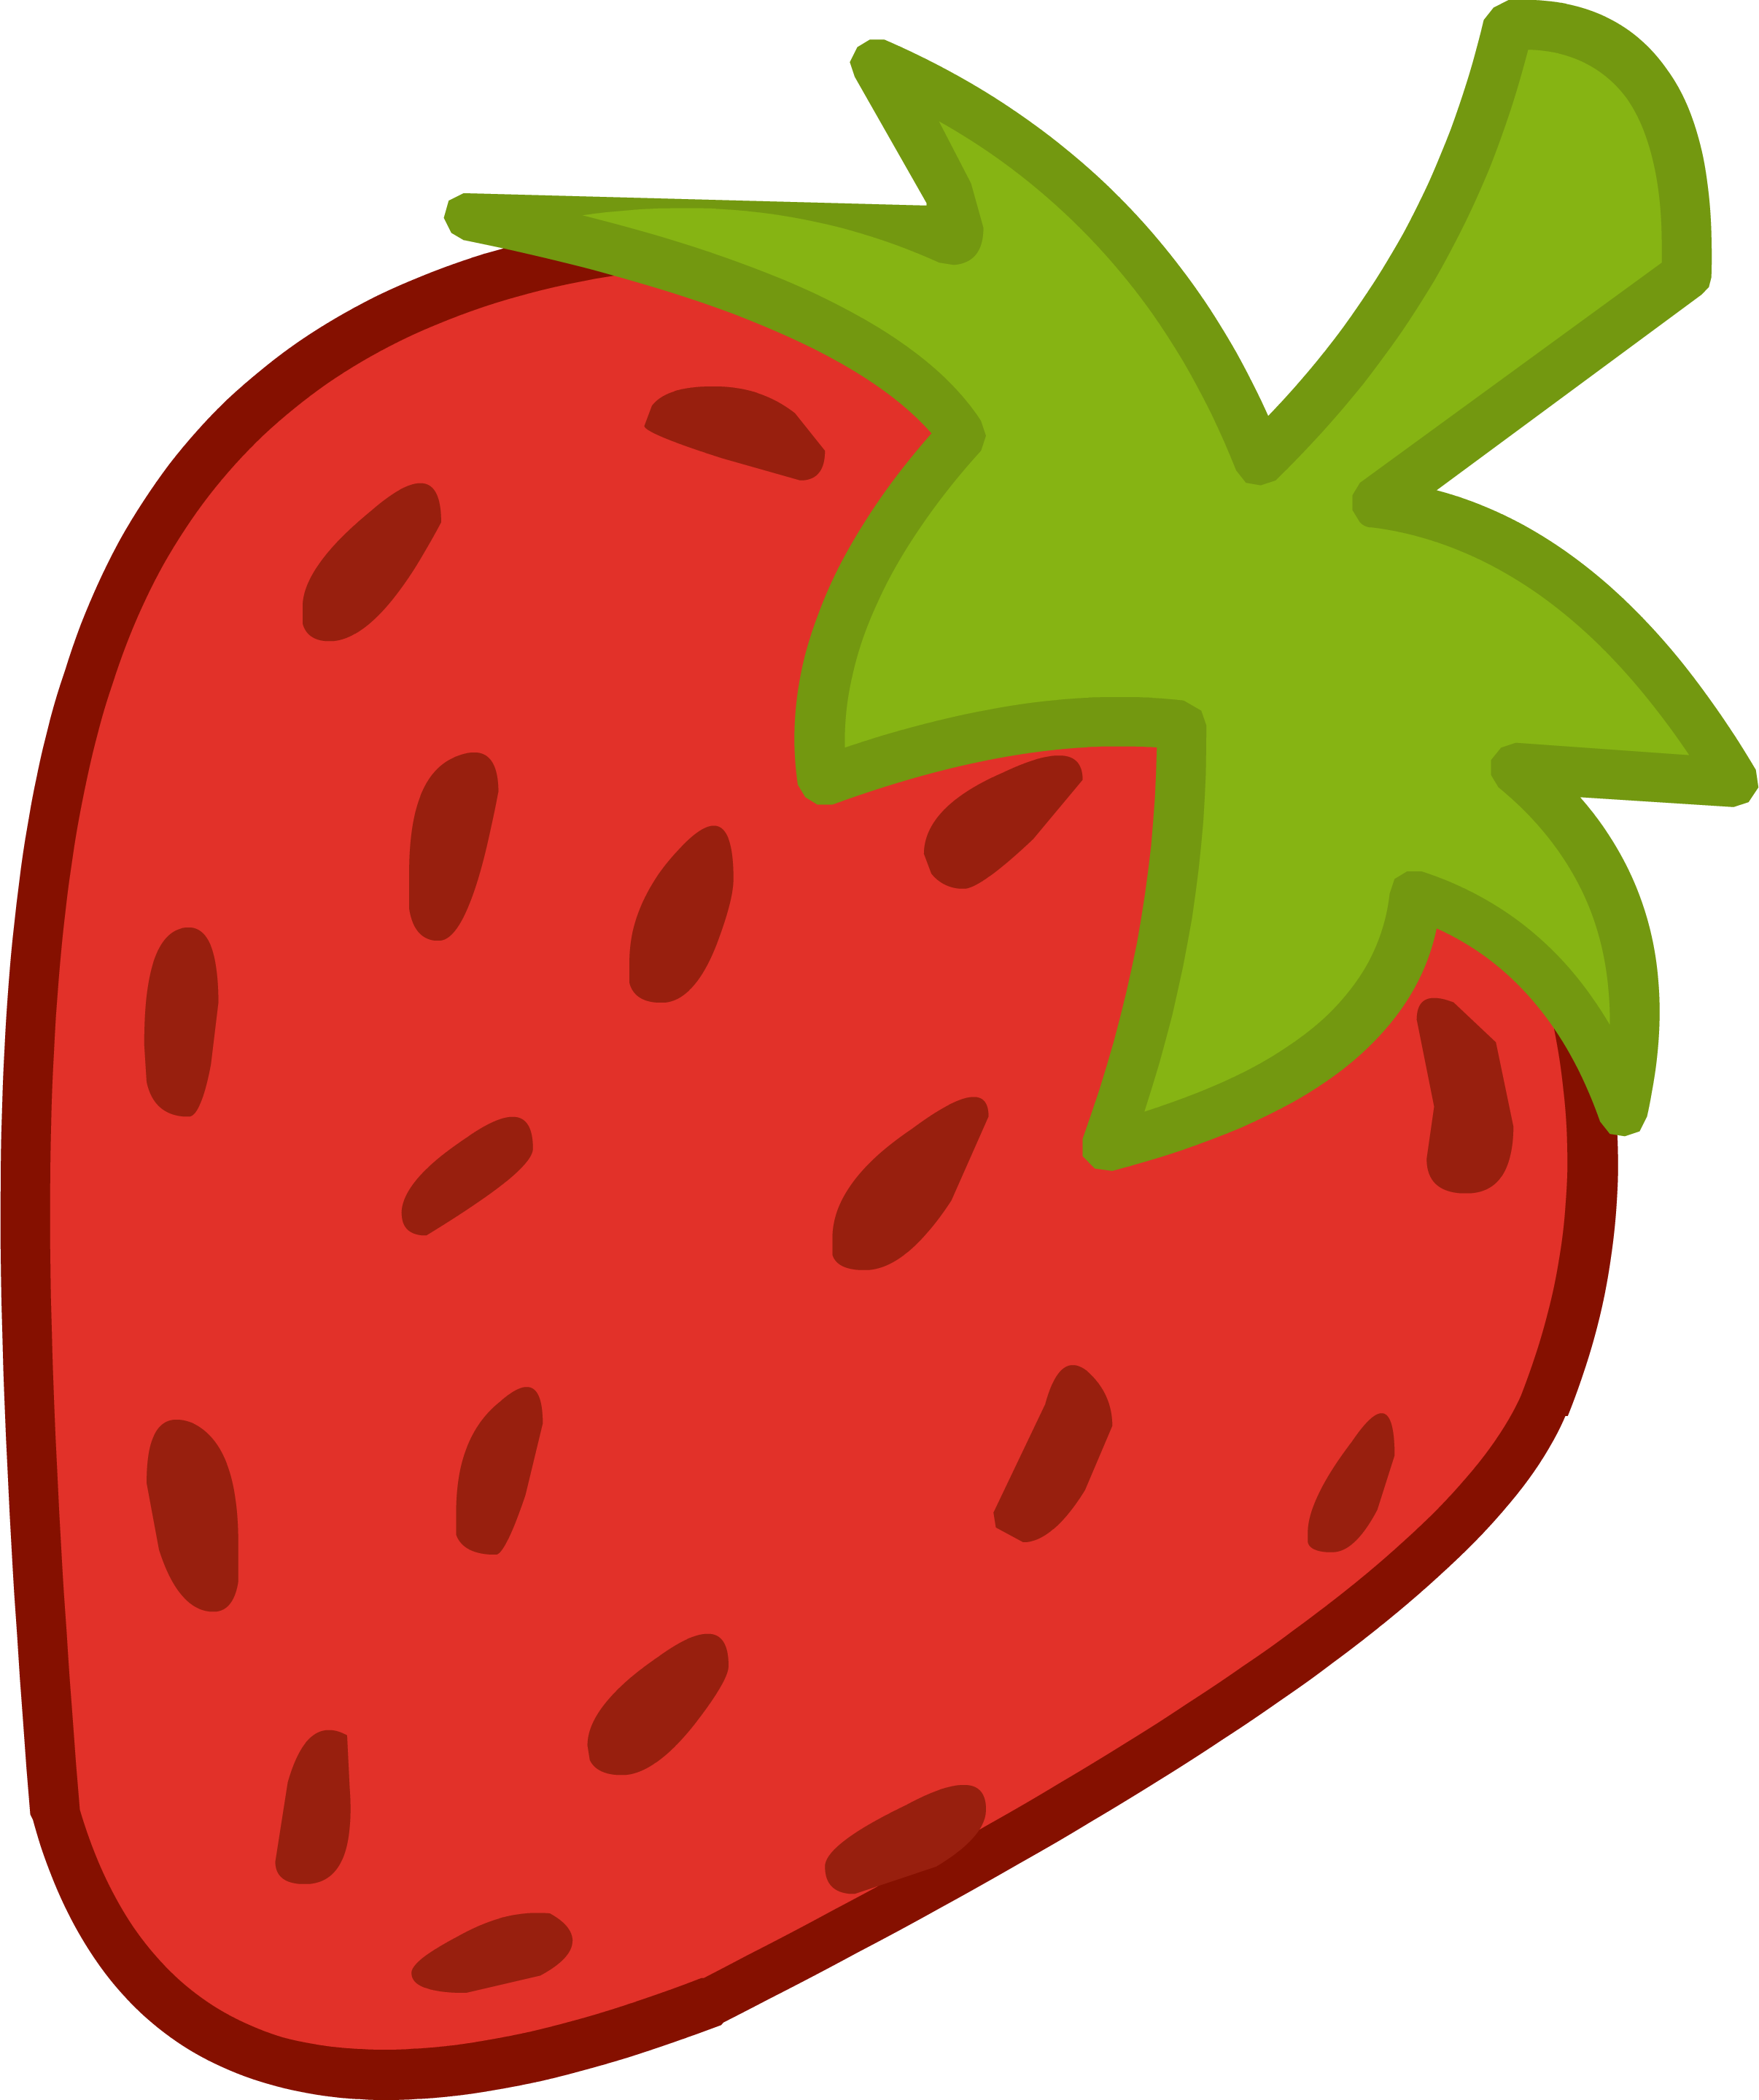 Watermelon clipart gambar. Strawberry png images transparent